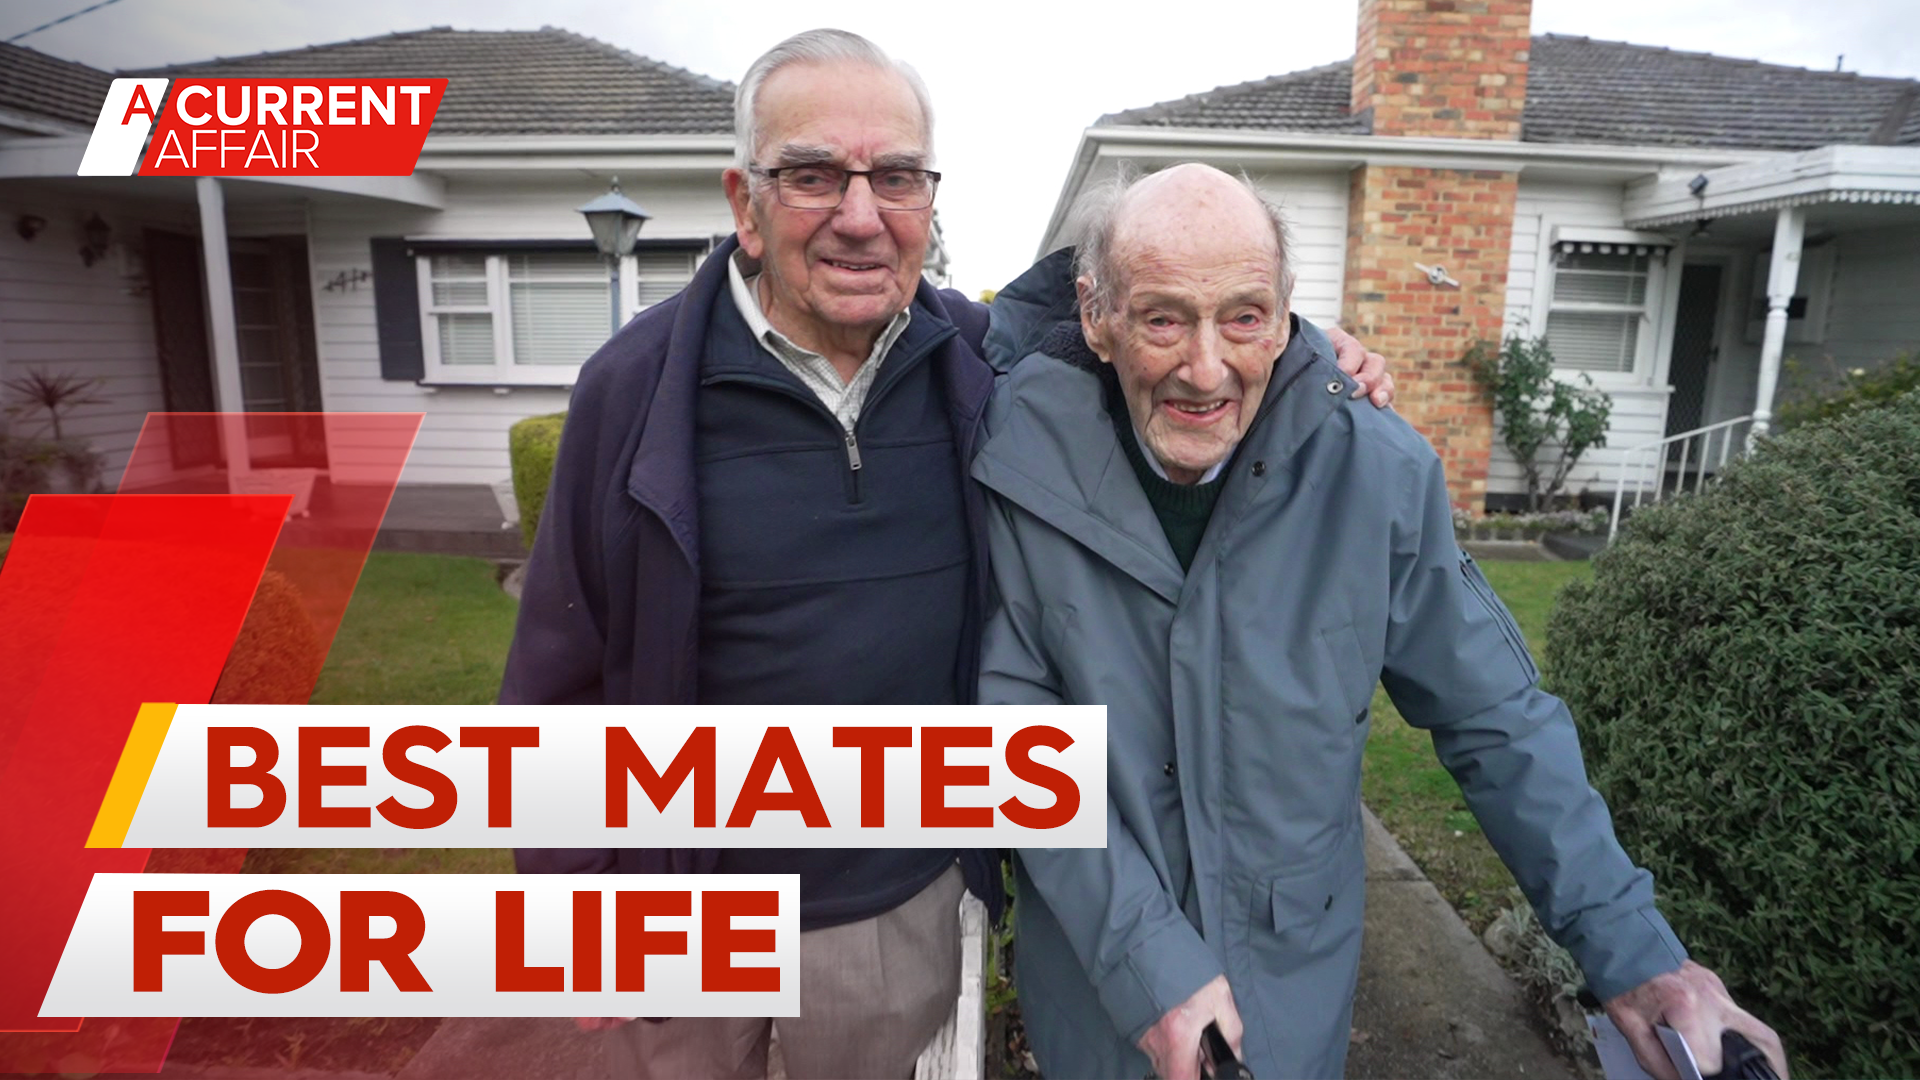 The 100-year-old mates who catch up through a hole in their fence